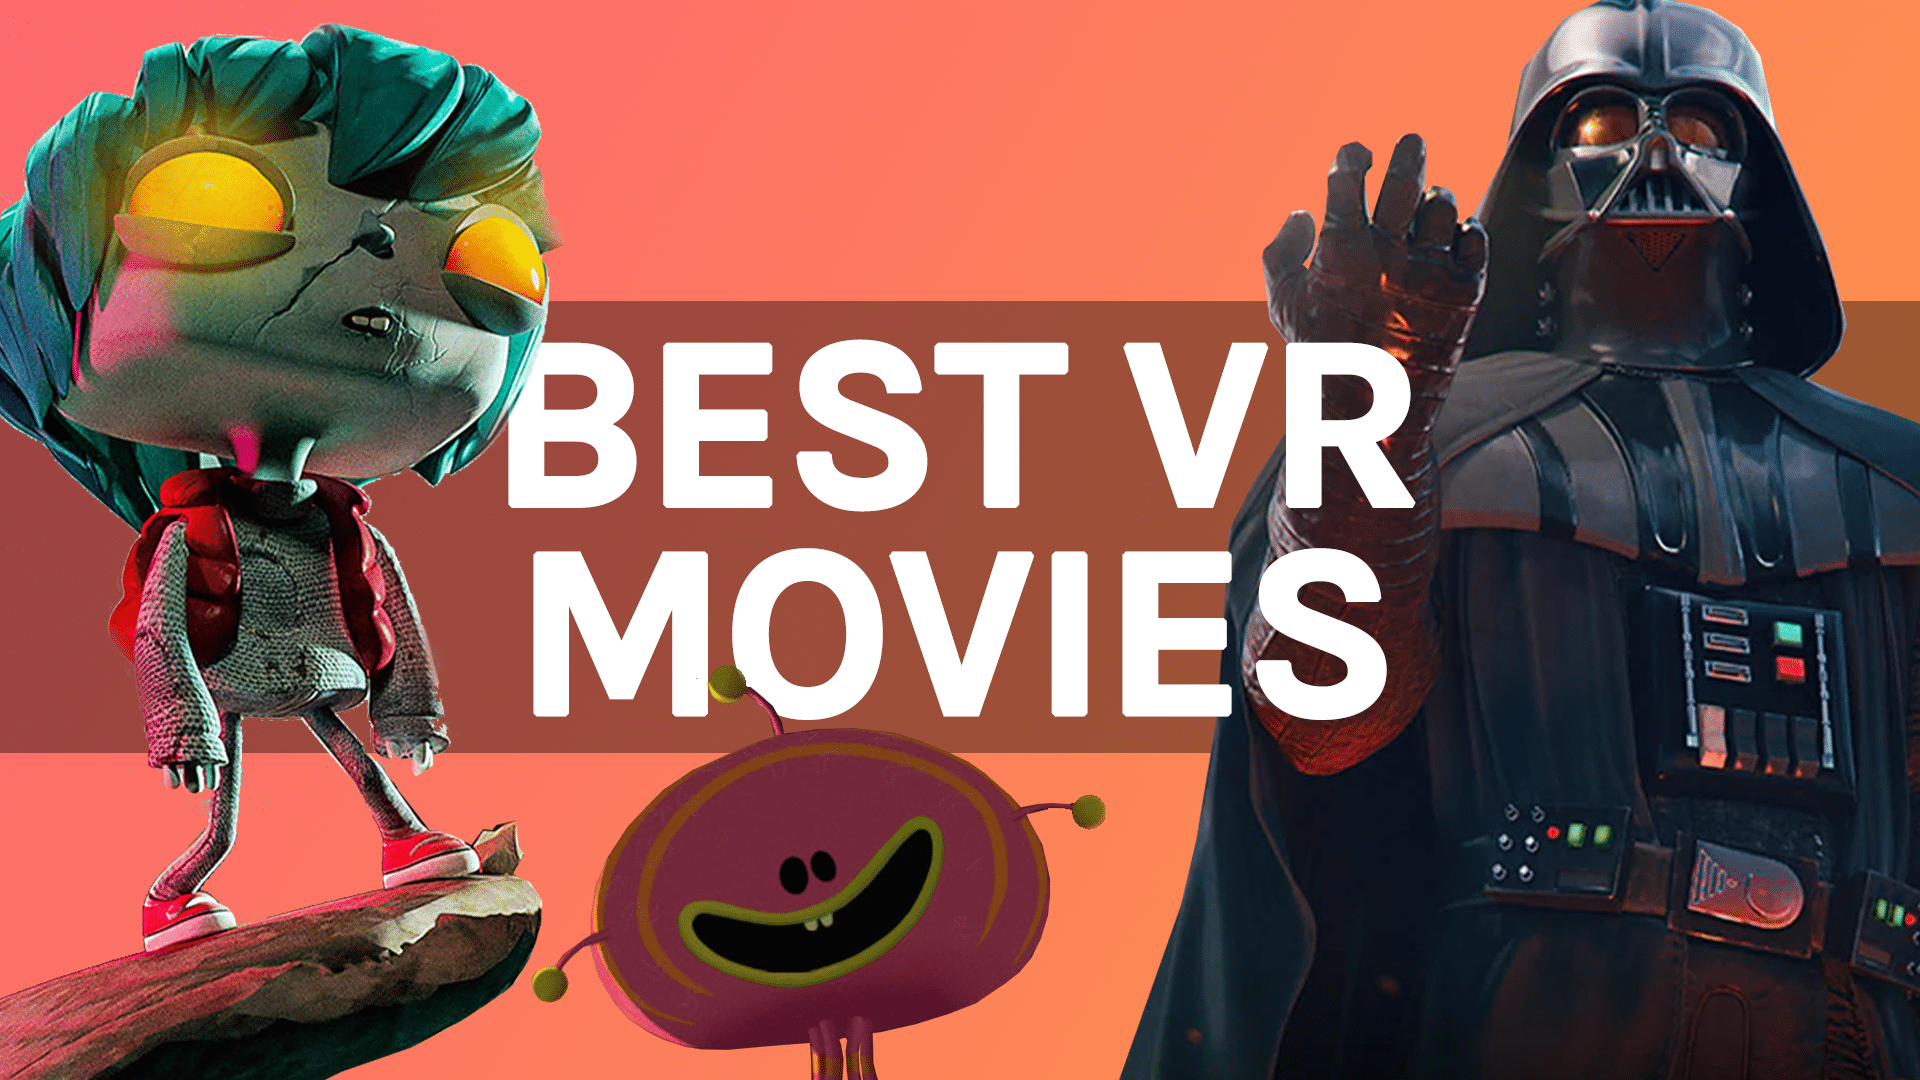 Best VR Cooking Games: Top 10 Titles To Try Now